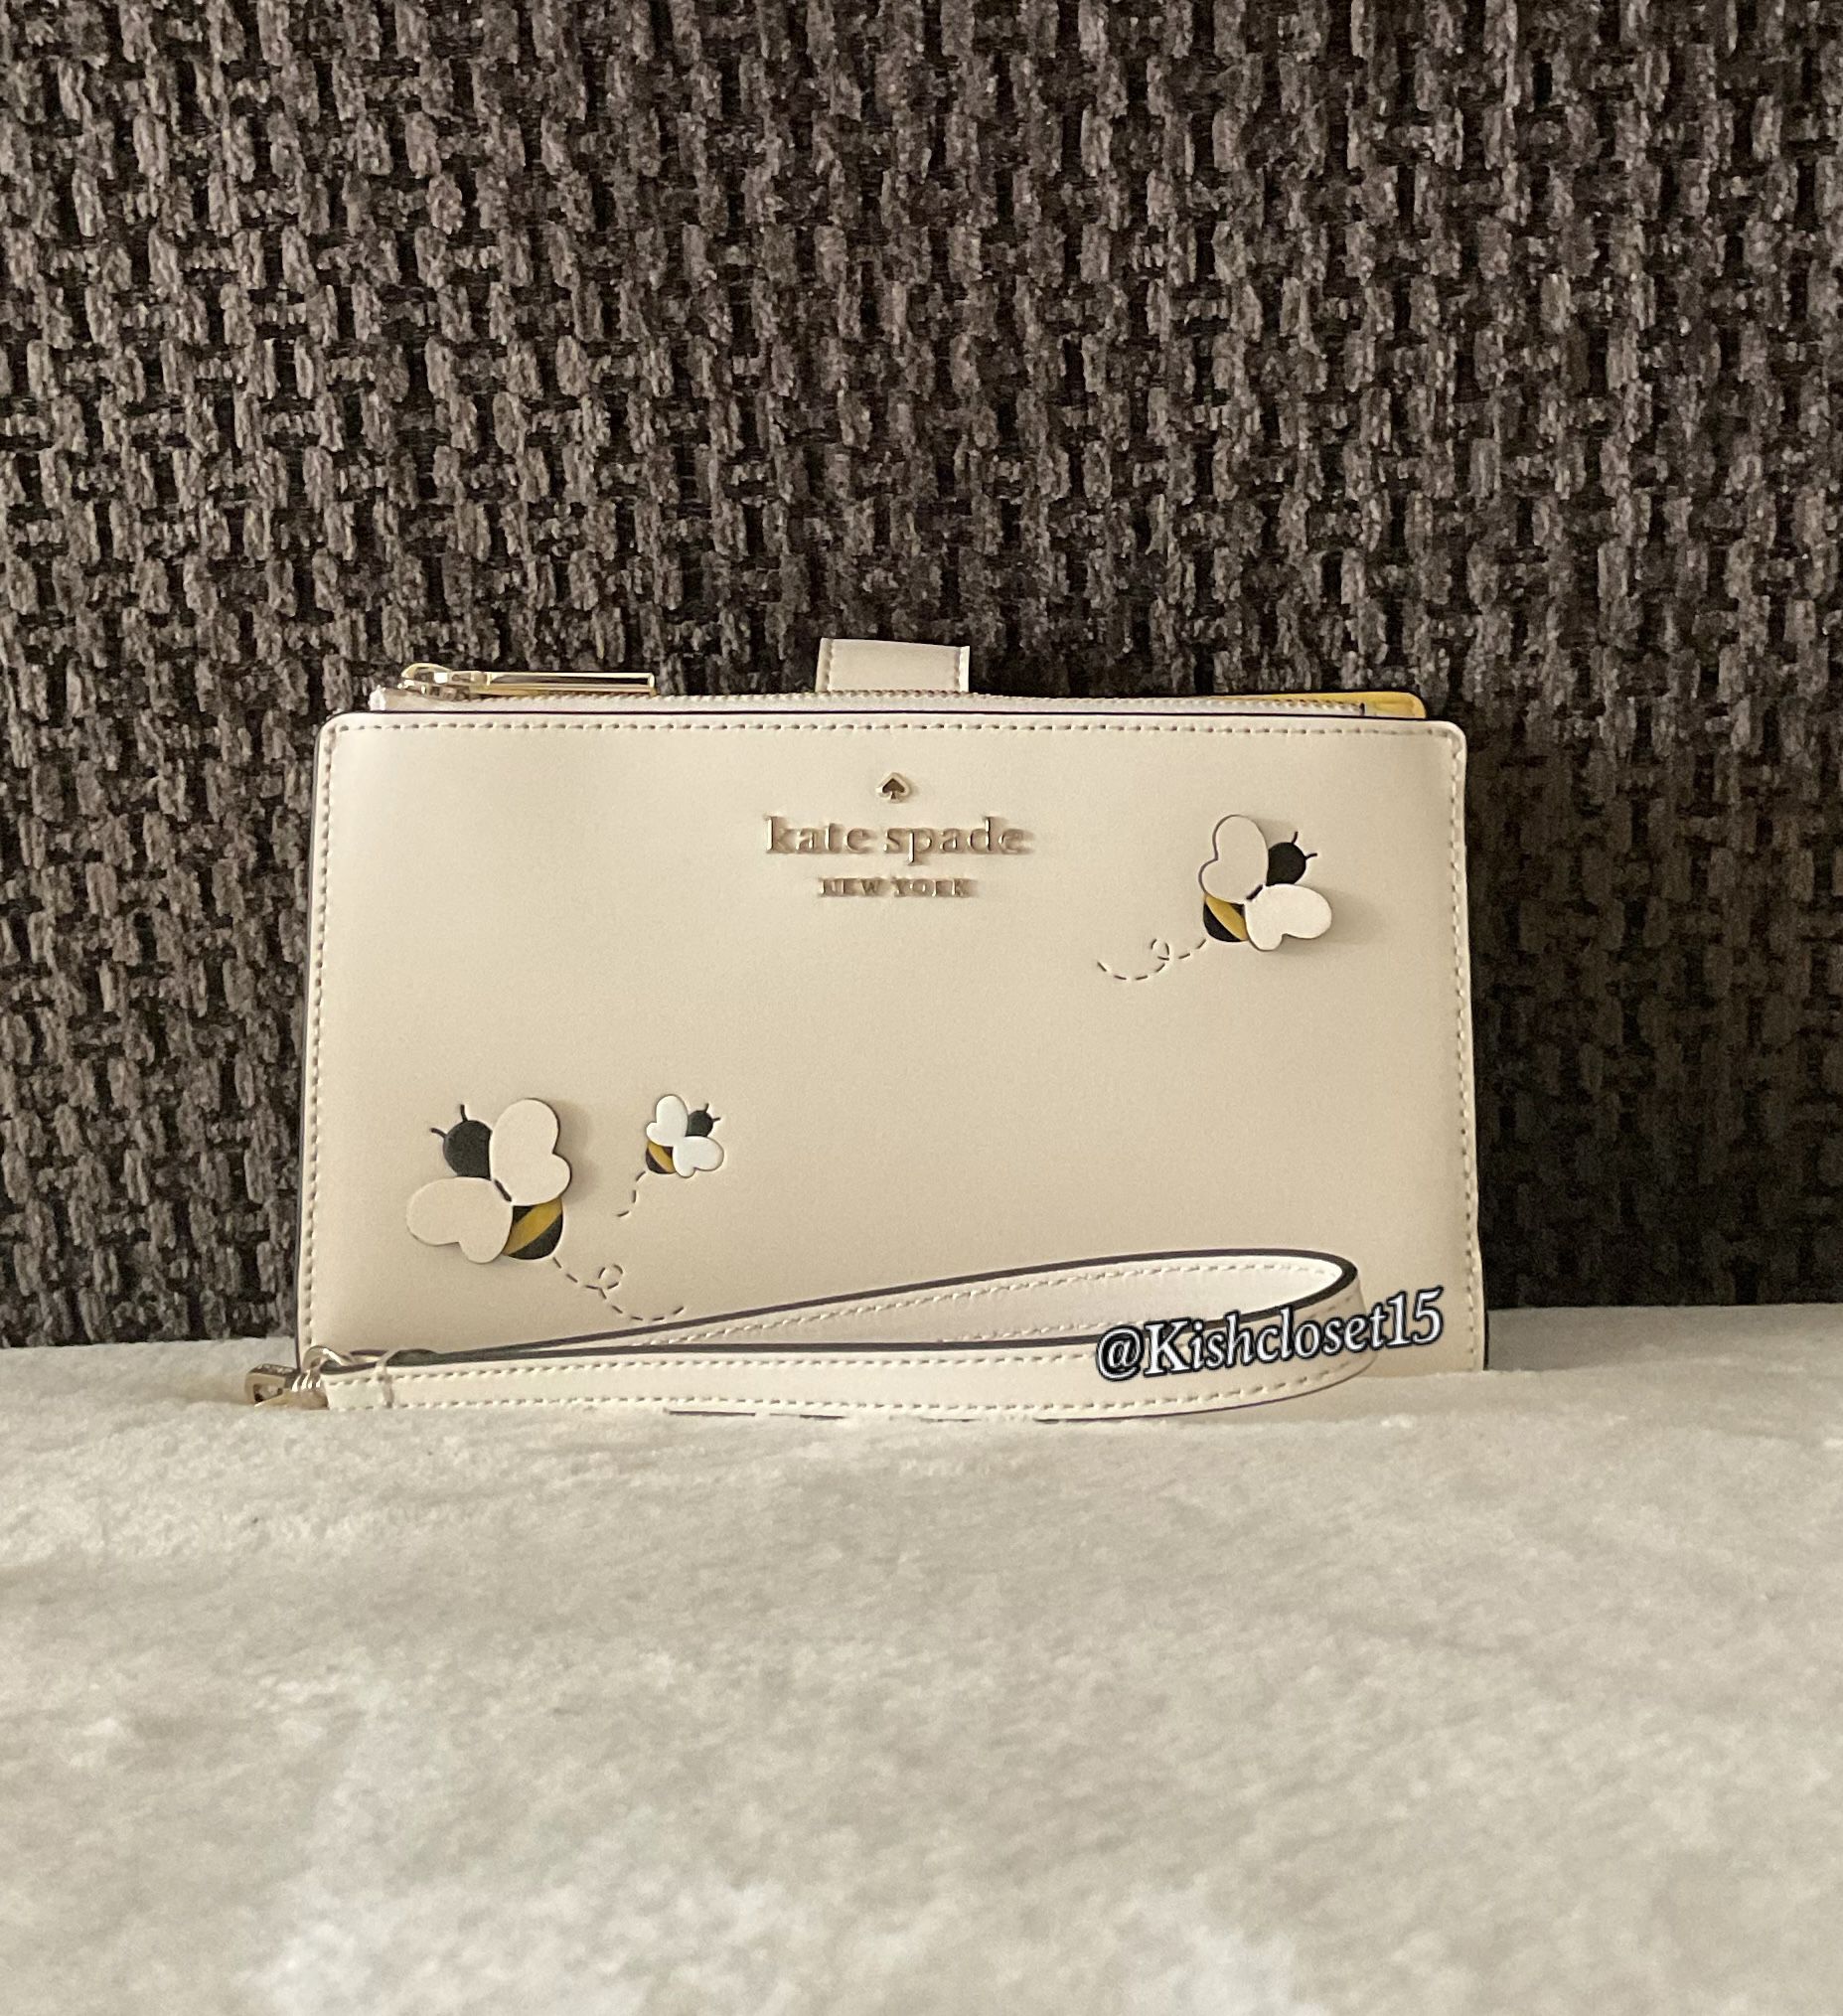 NWT AUTHENTIC Limited Edition Kate Spade Honey Bee Phone Wallet/Wristlet  for Sale in Upland, CA - OfferUp